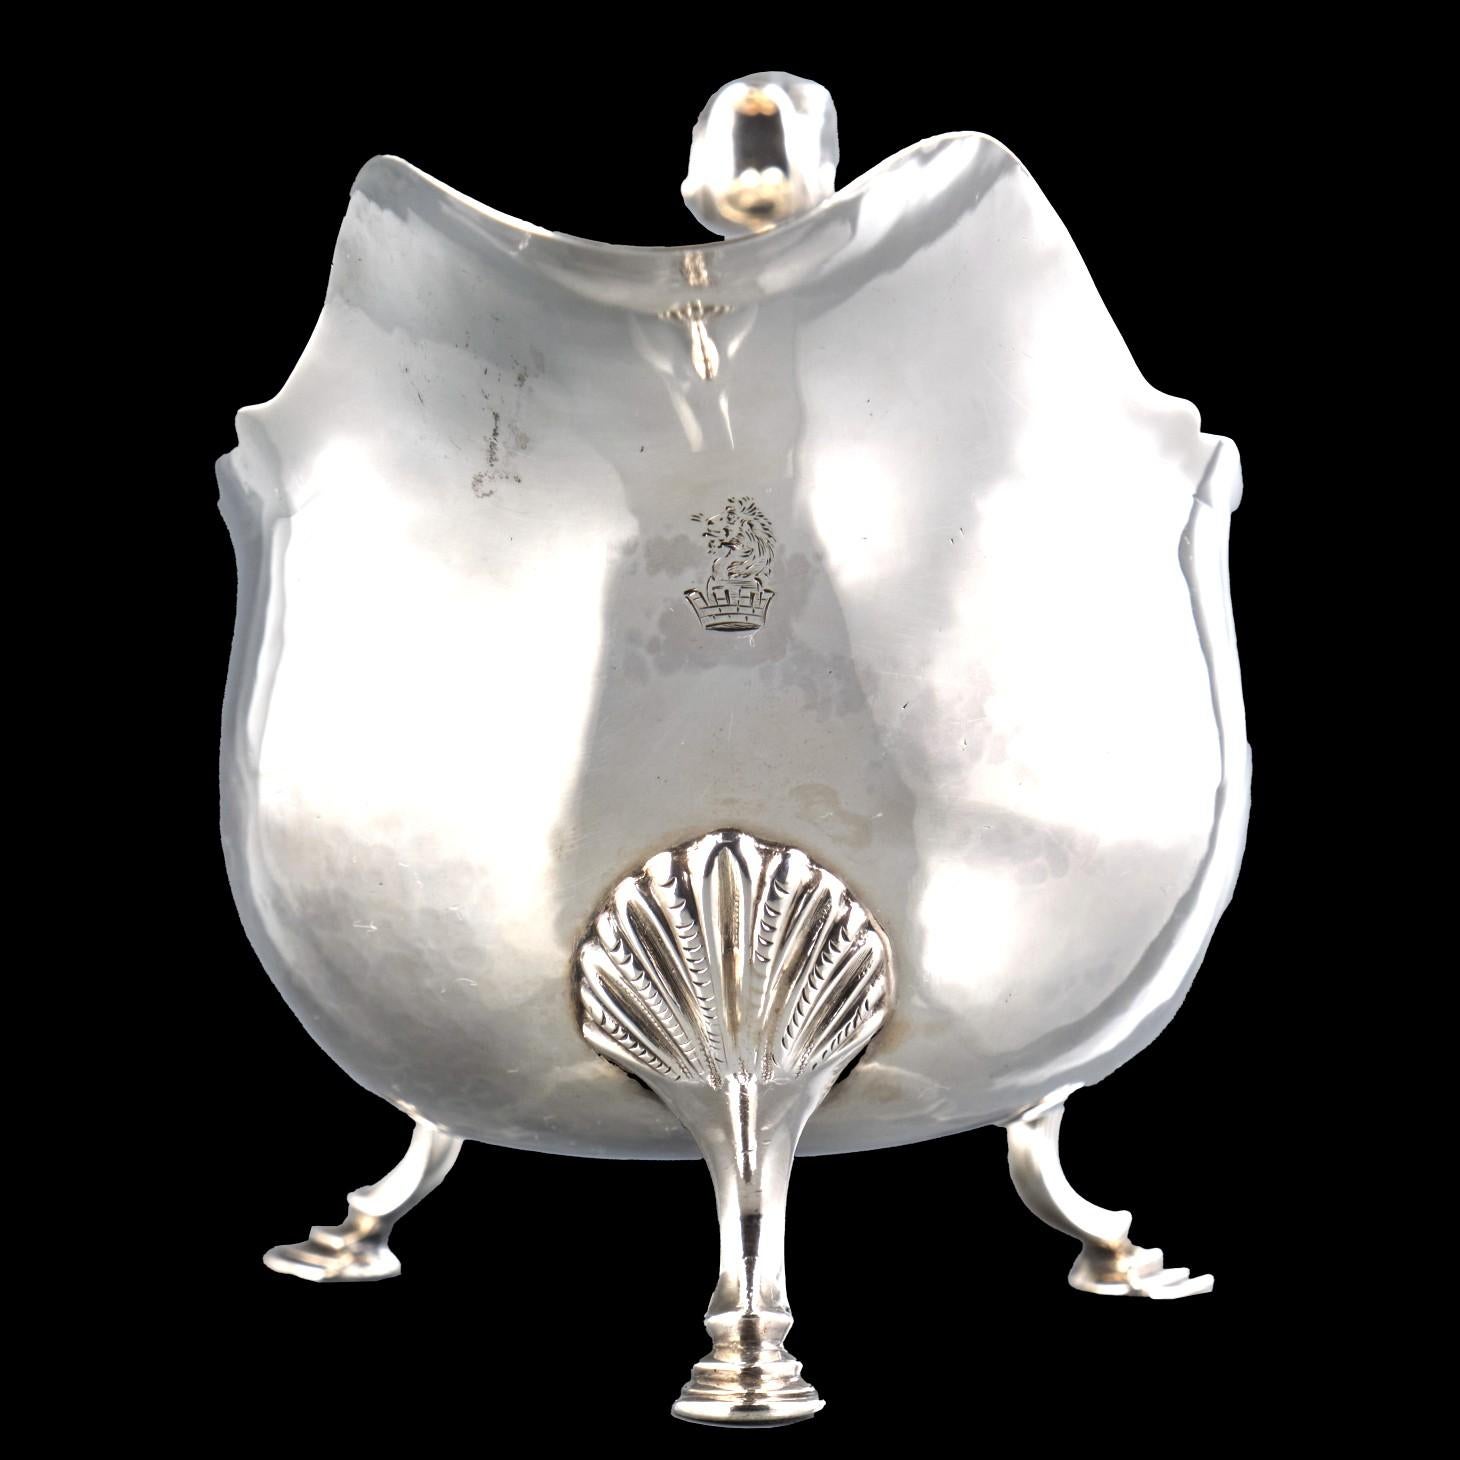 Fine Pair of Mid 18th Century Georgian Sterling Silver Sauce Boats, London 1762 For Sale 2